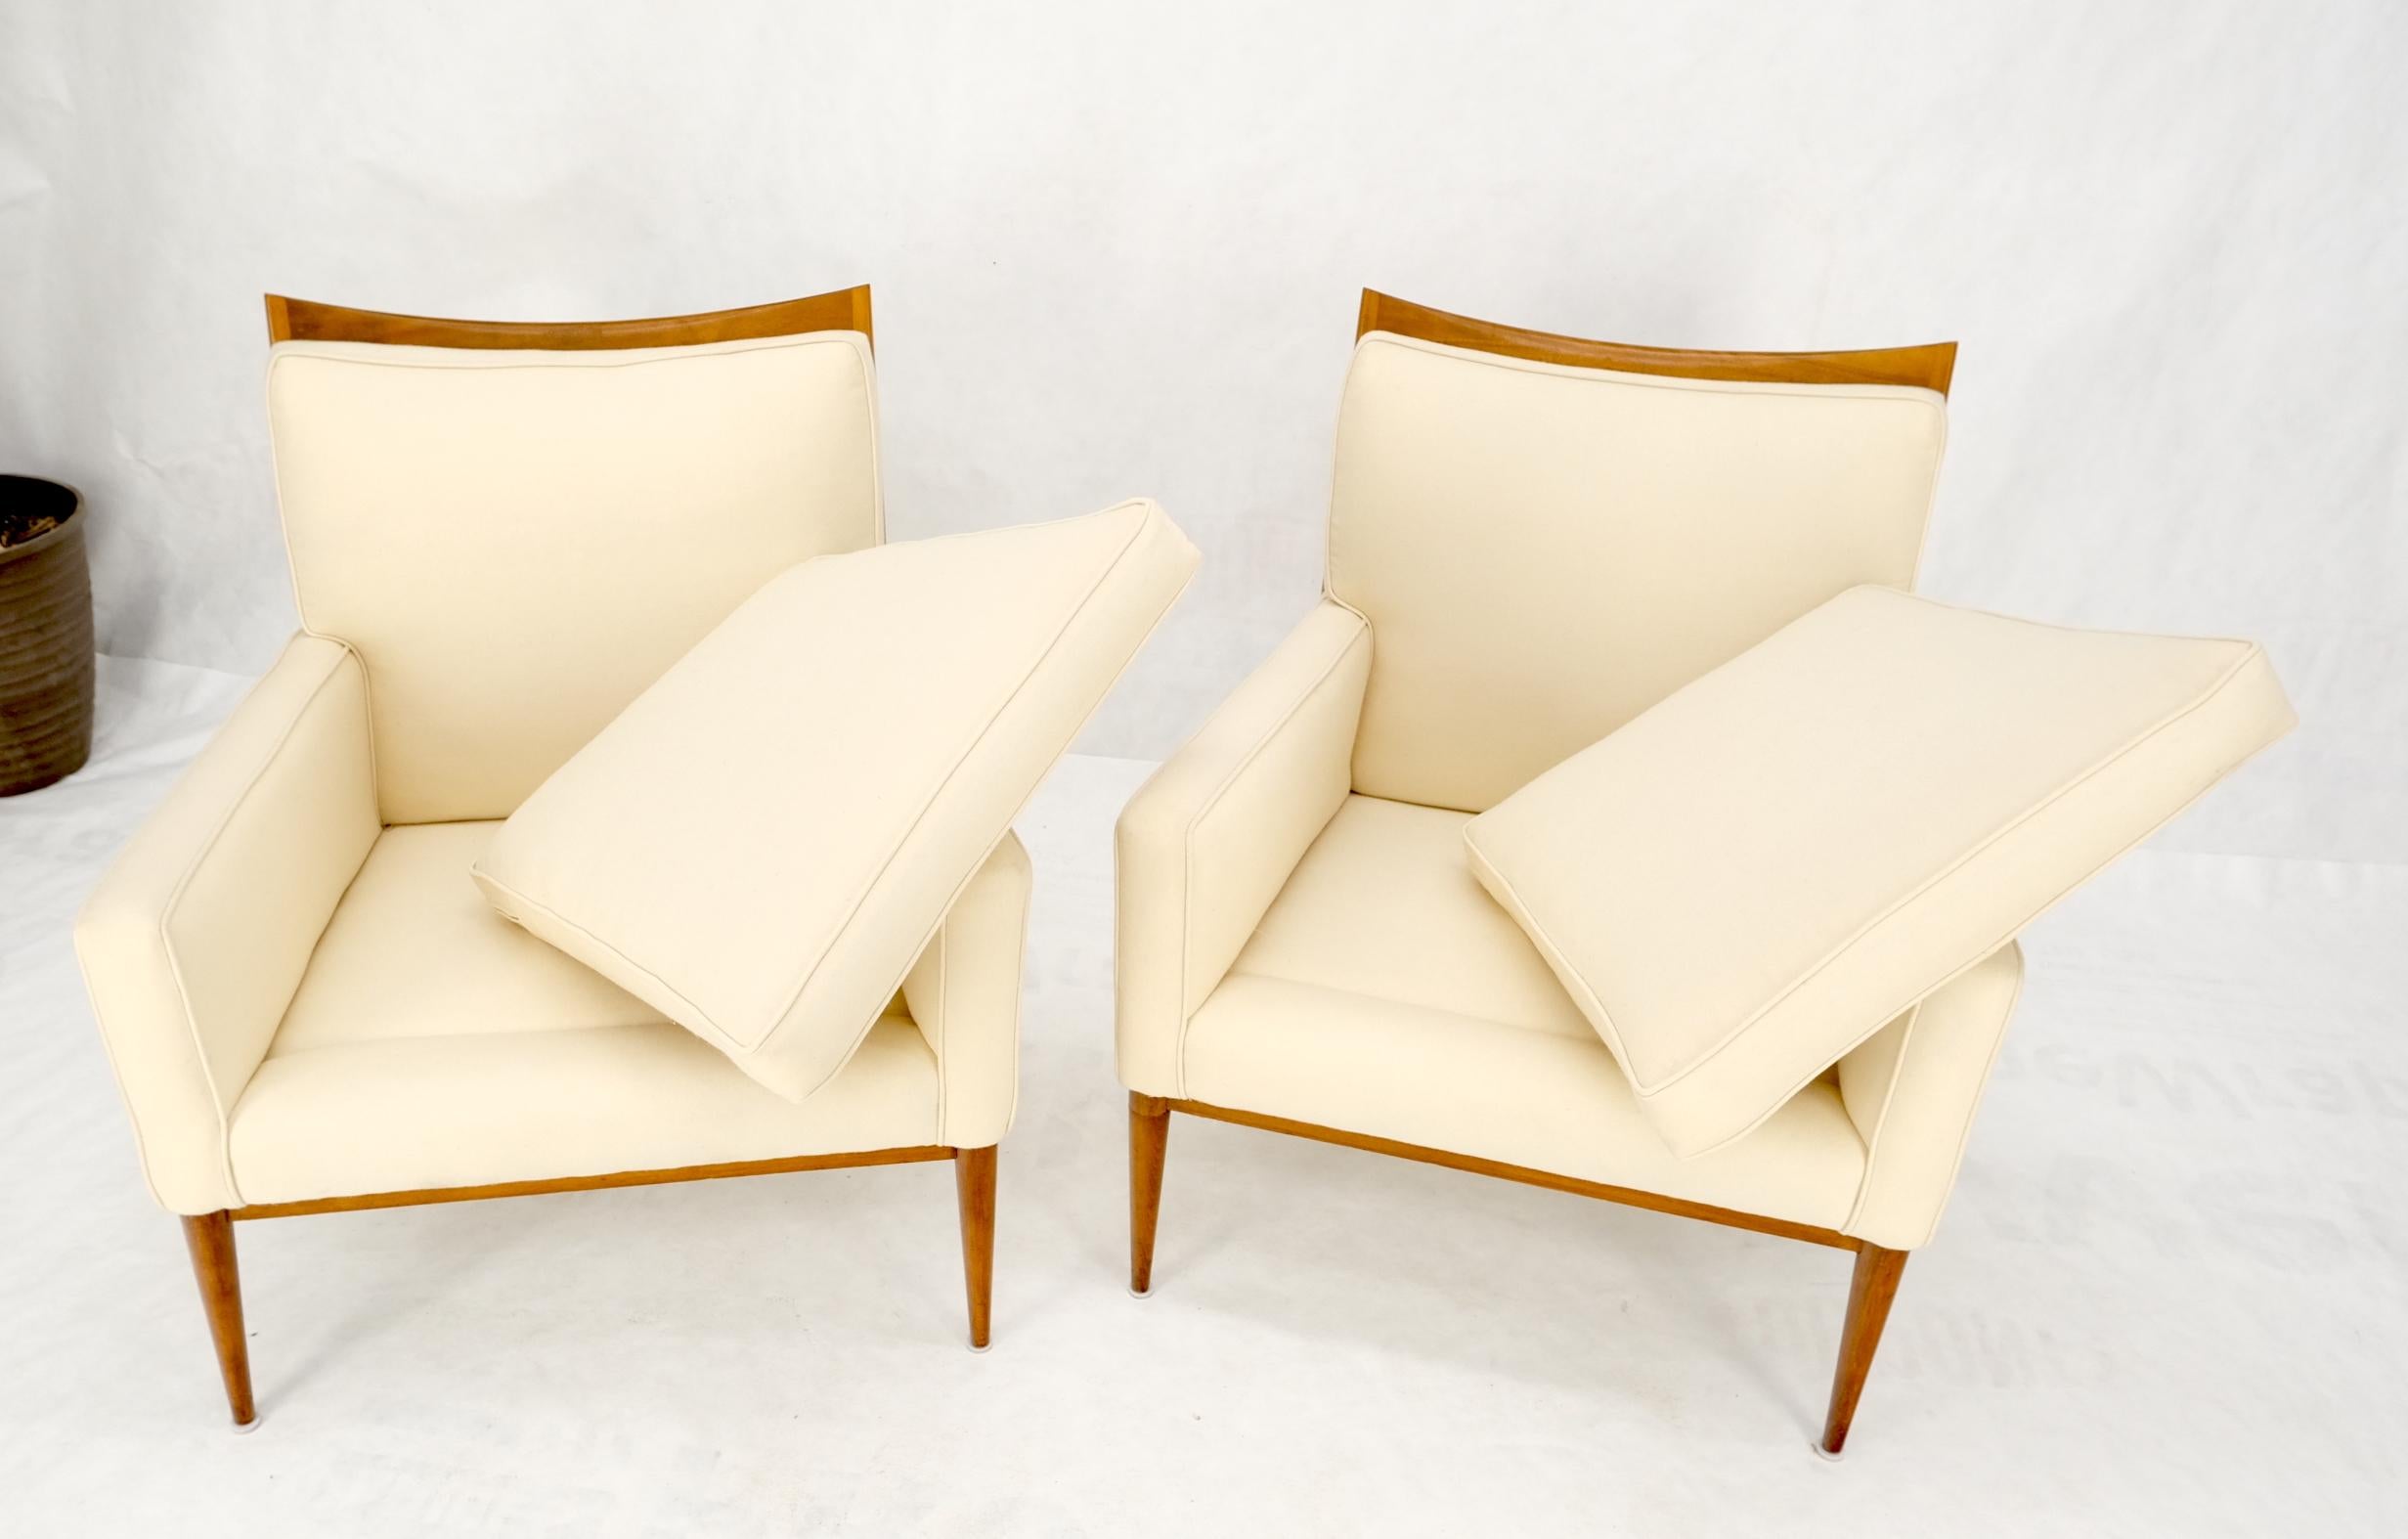 Pair of Mid Century Modern McCobb Chairs Newly Upholstered in Cream Virgin Wool For Sale 12